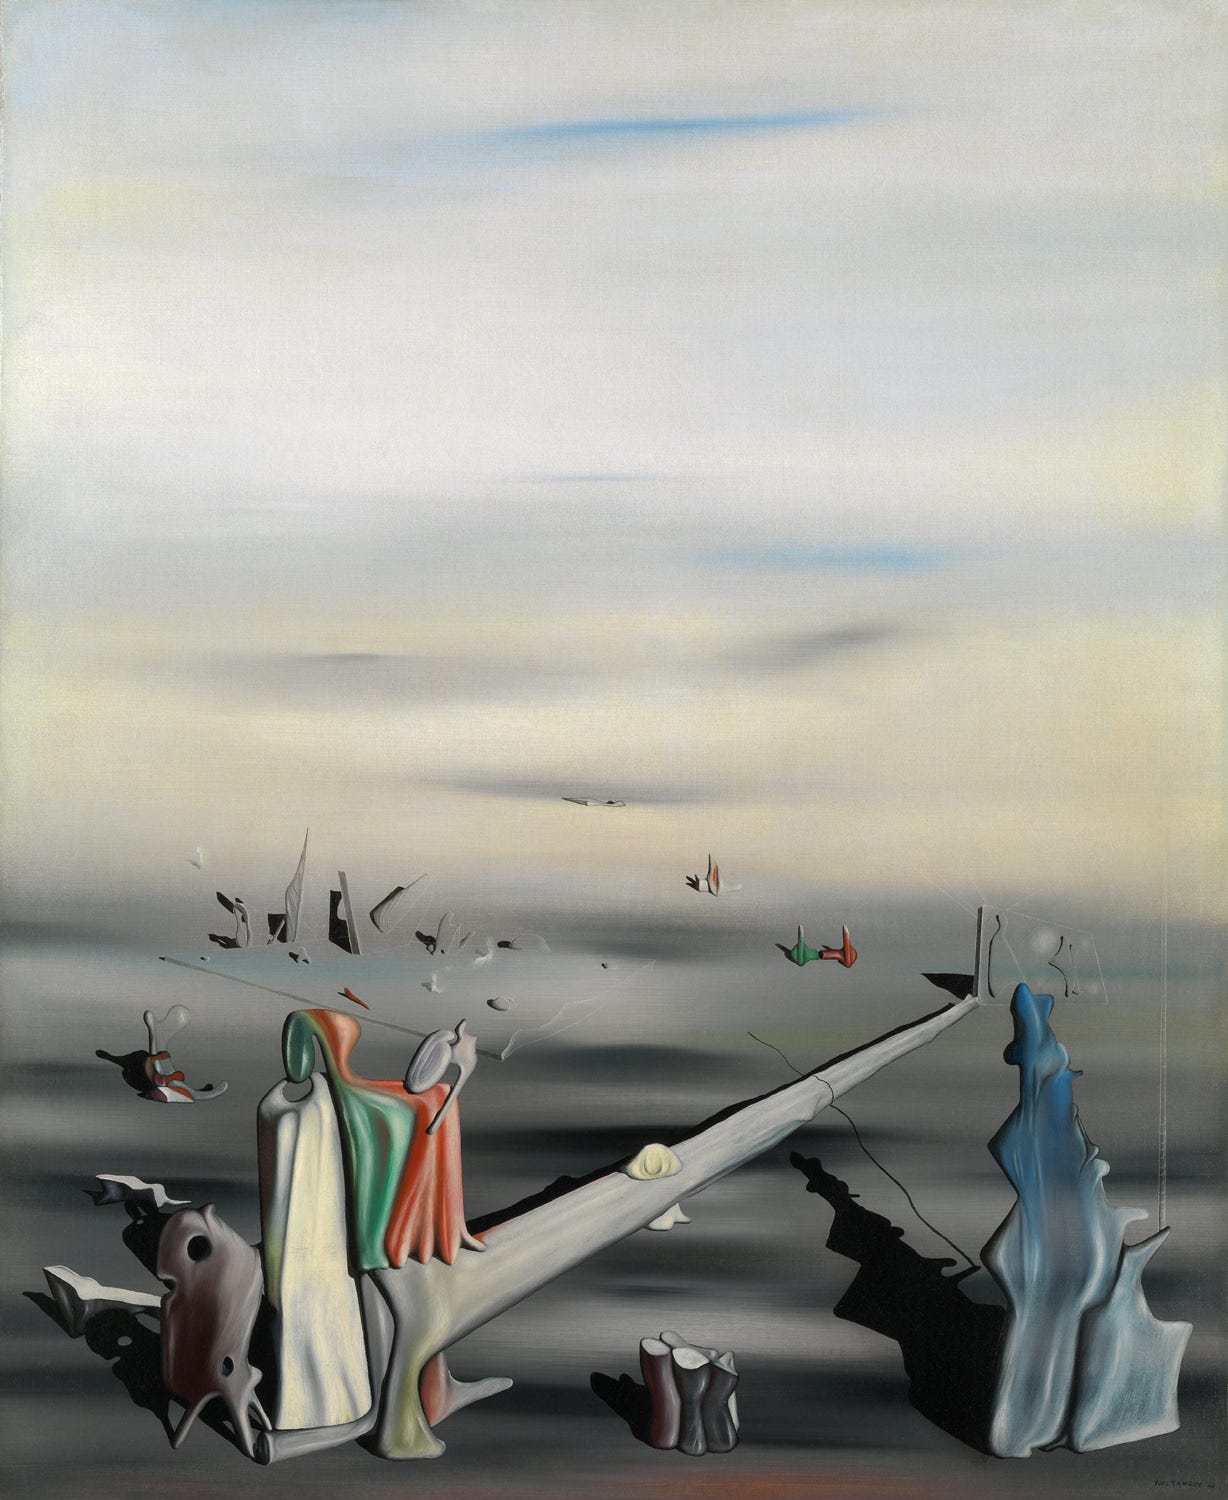 The Satin Tuning Fork by Yves Tanguy | Obelisk Art History